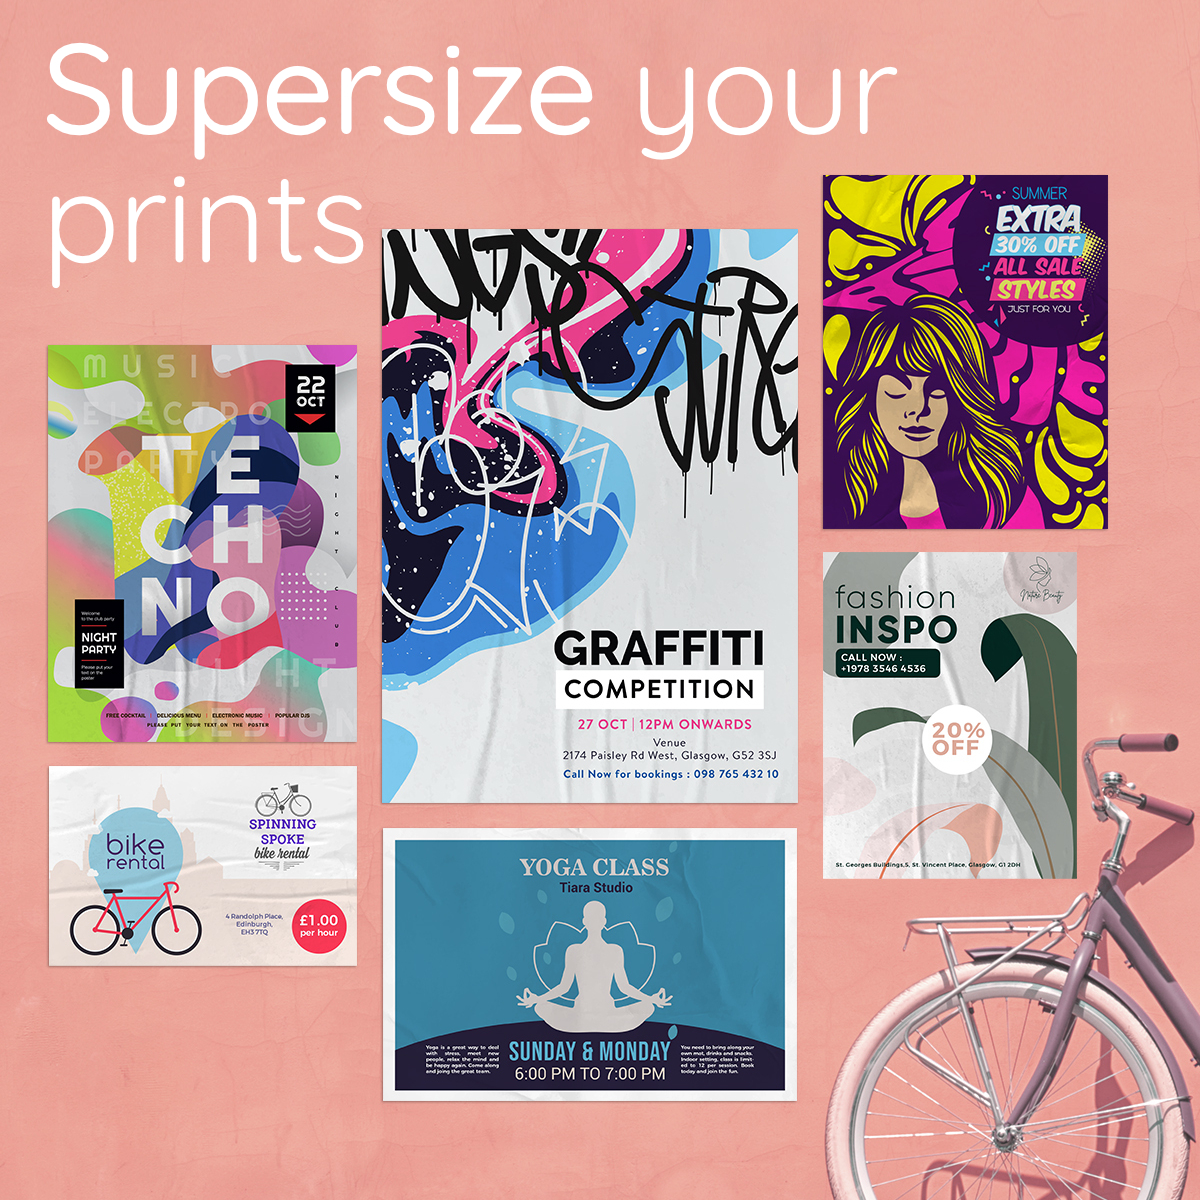 Get noticed when you supersize your prints